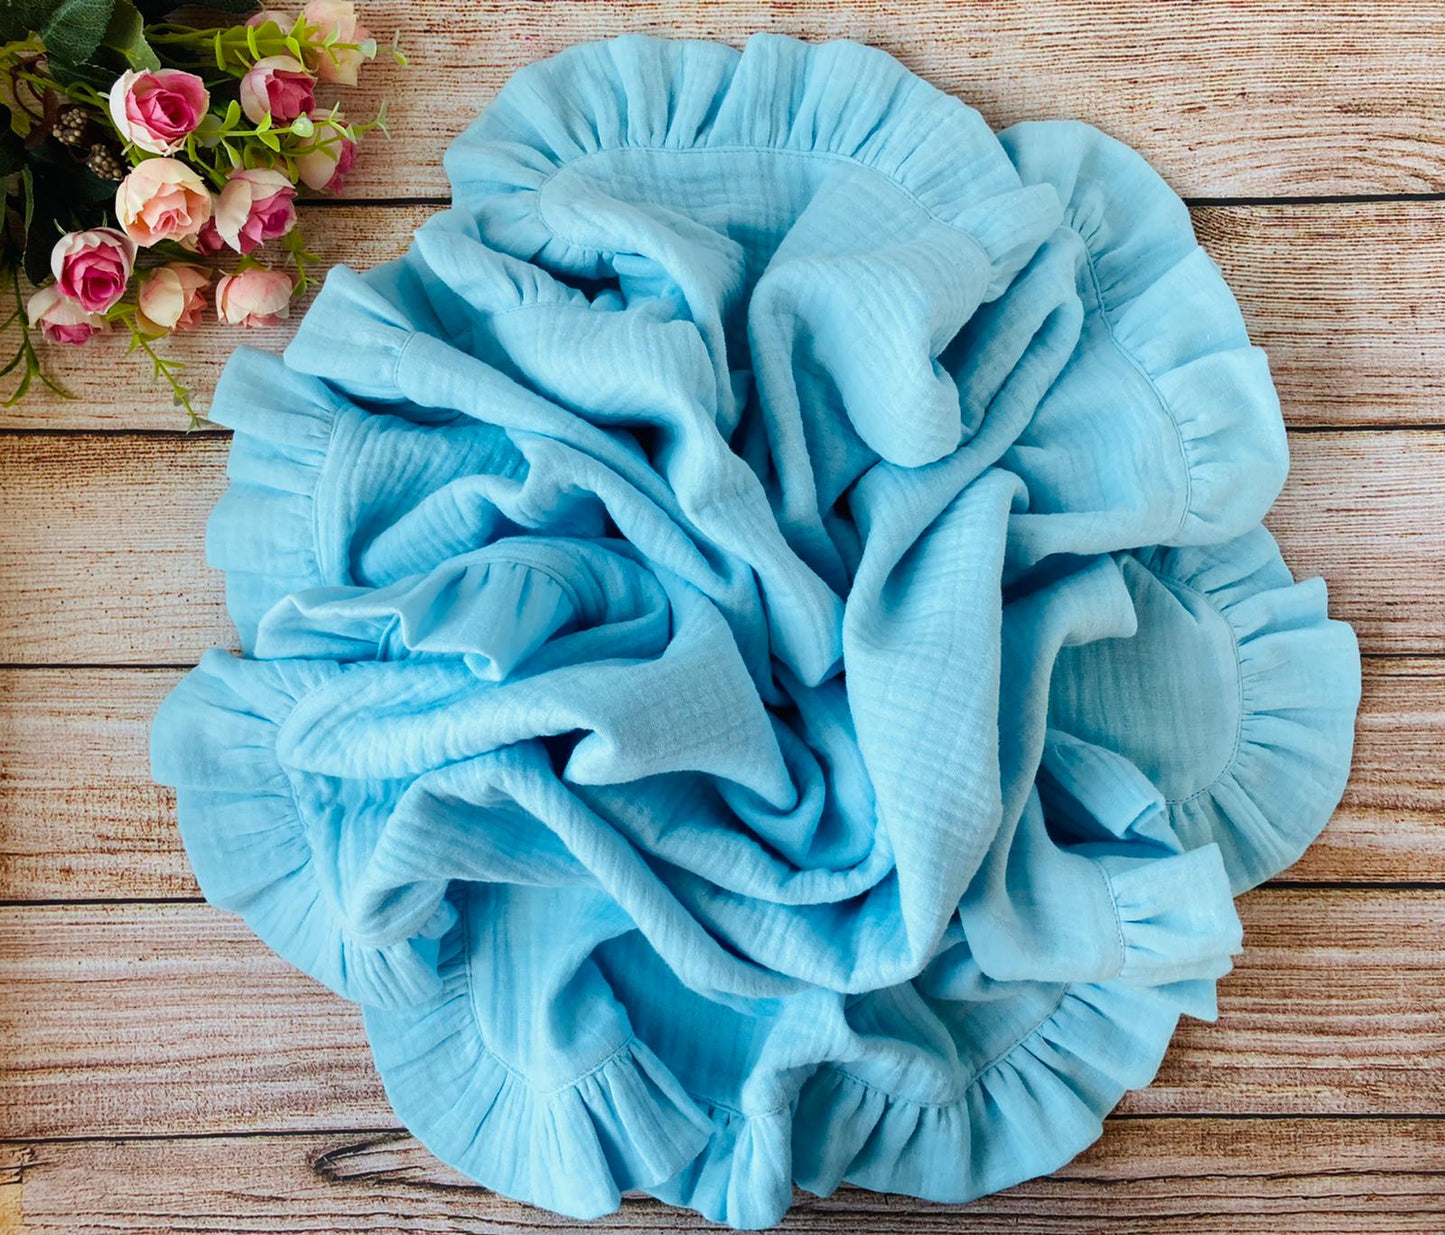 2 layer Cotton muslin ruffle blanket and Bunny comforter - perfect baby gift set, Light Blue